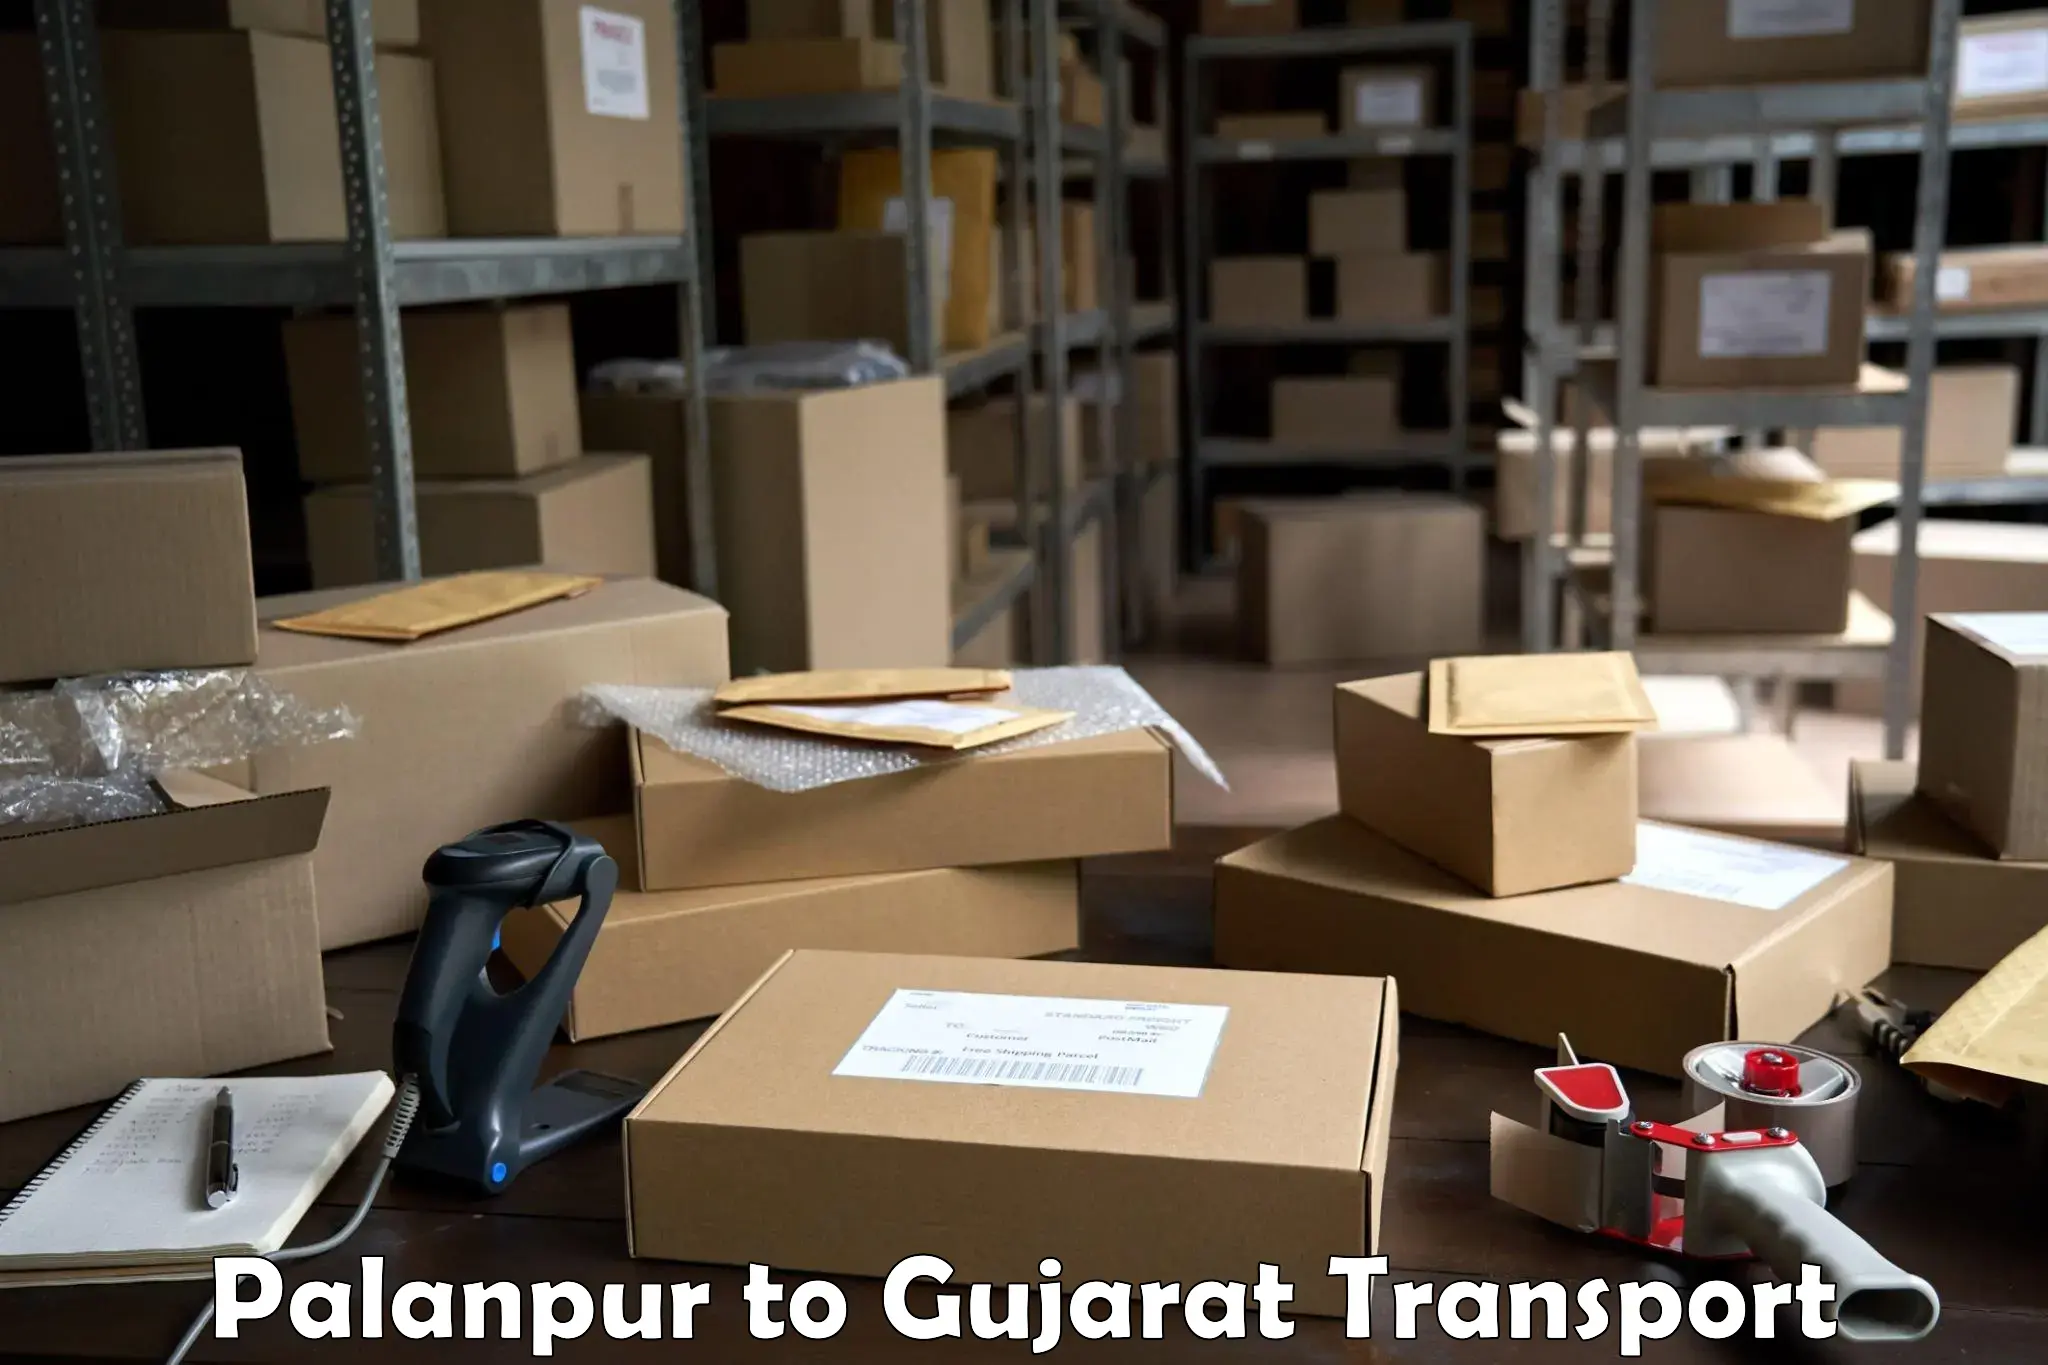 Delivery service Palanpur to Patan Gujarat